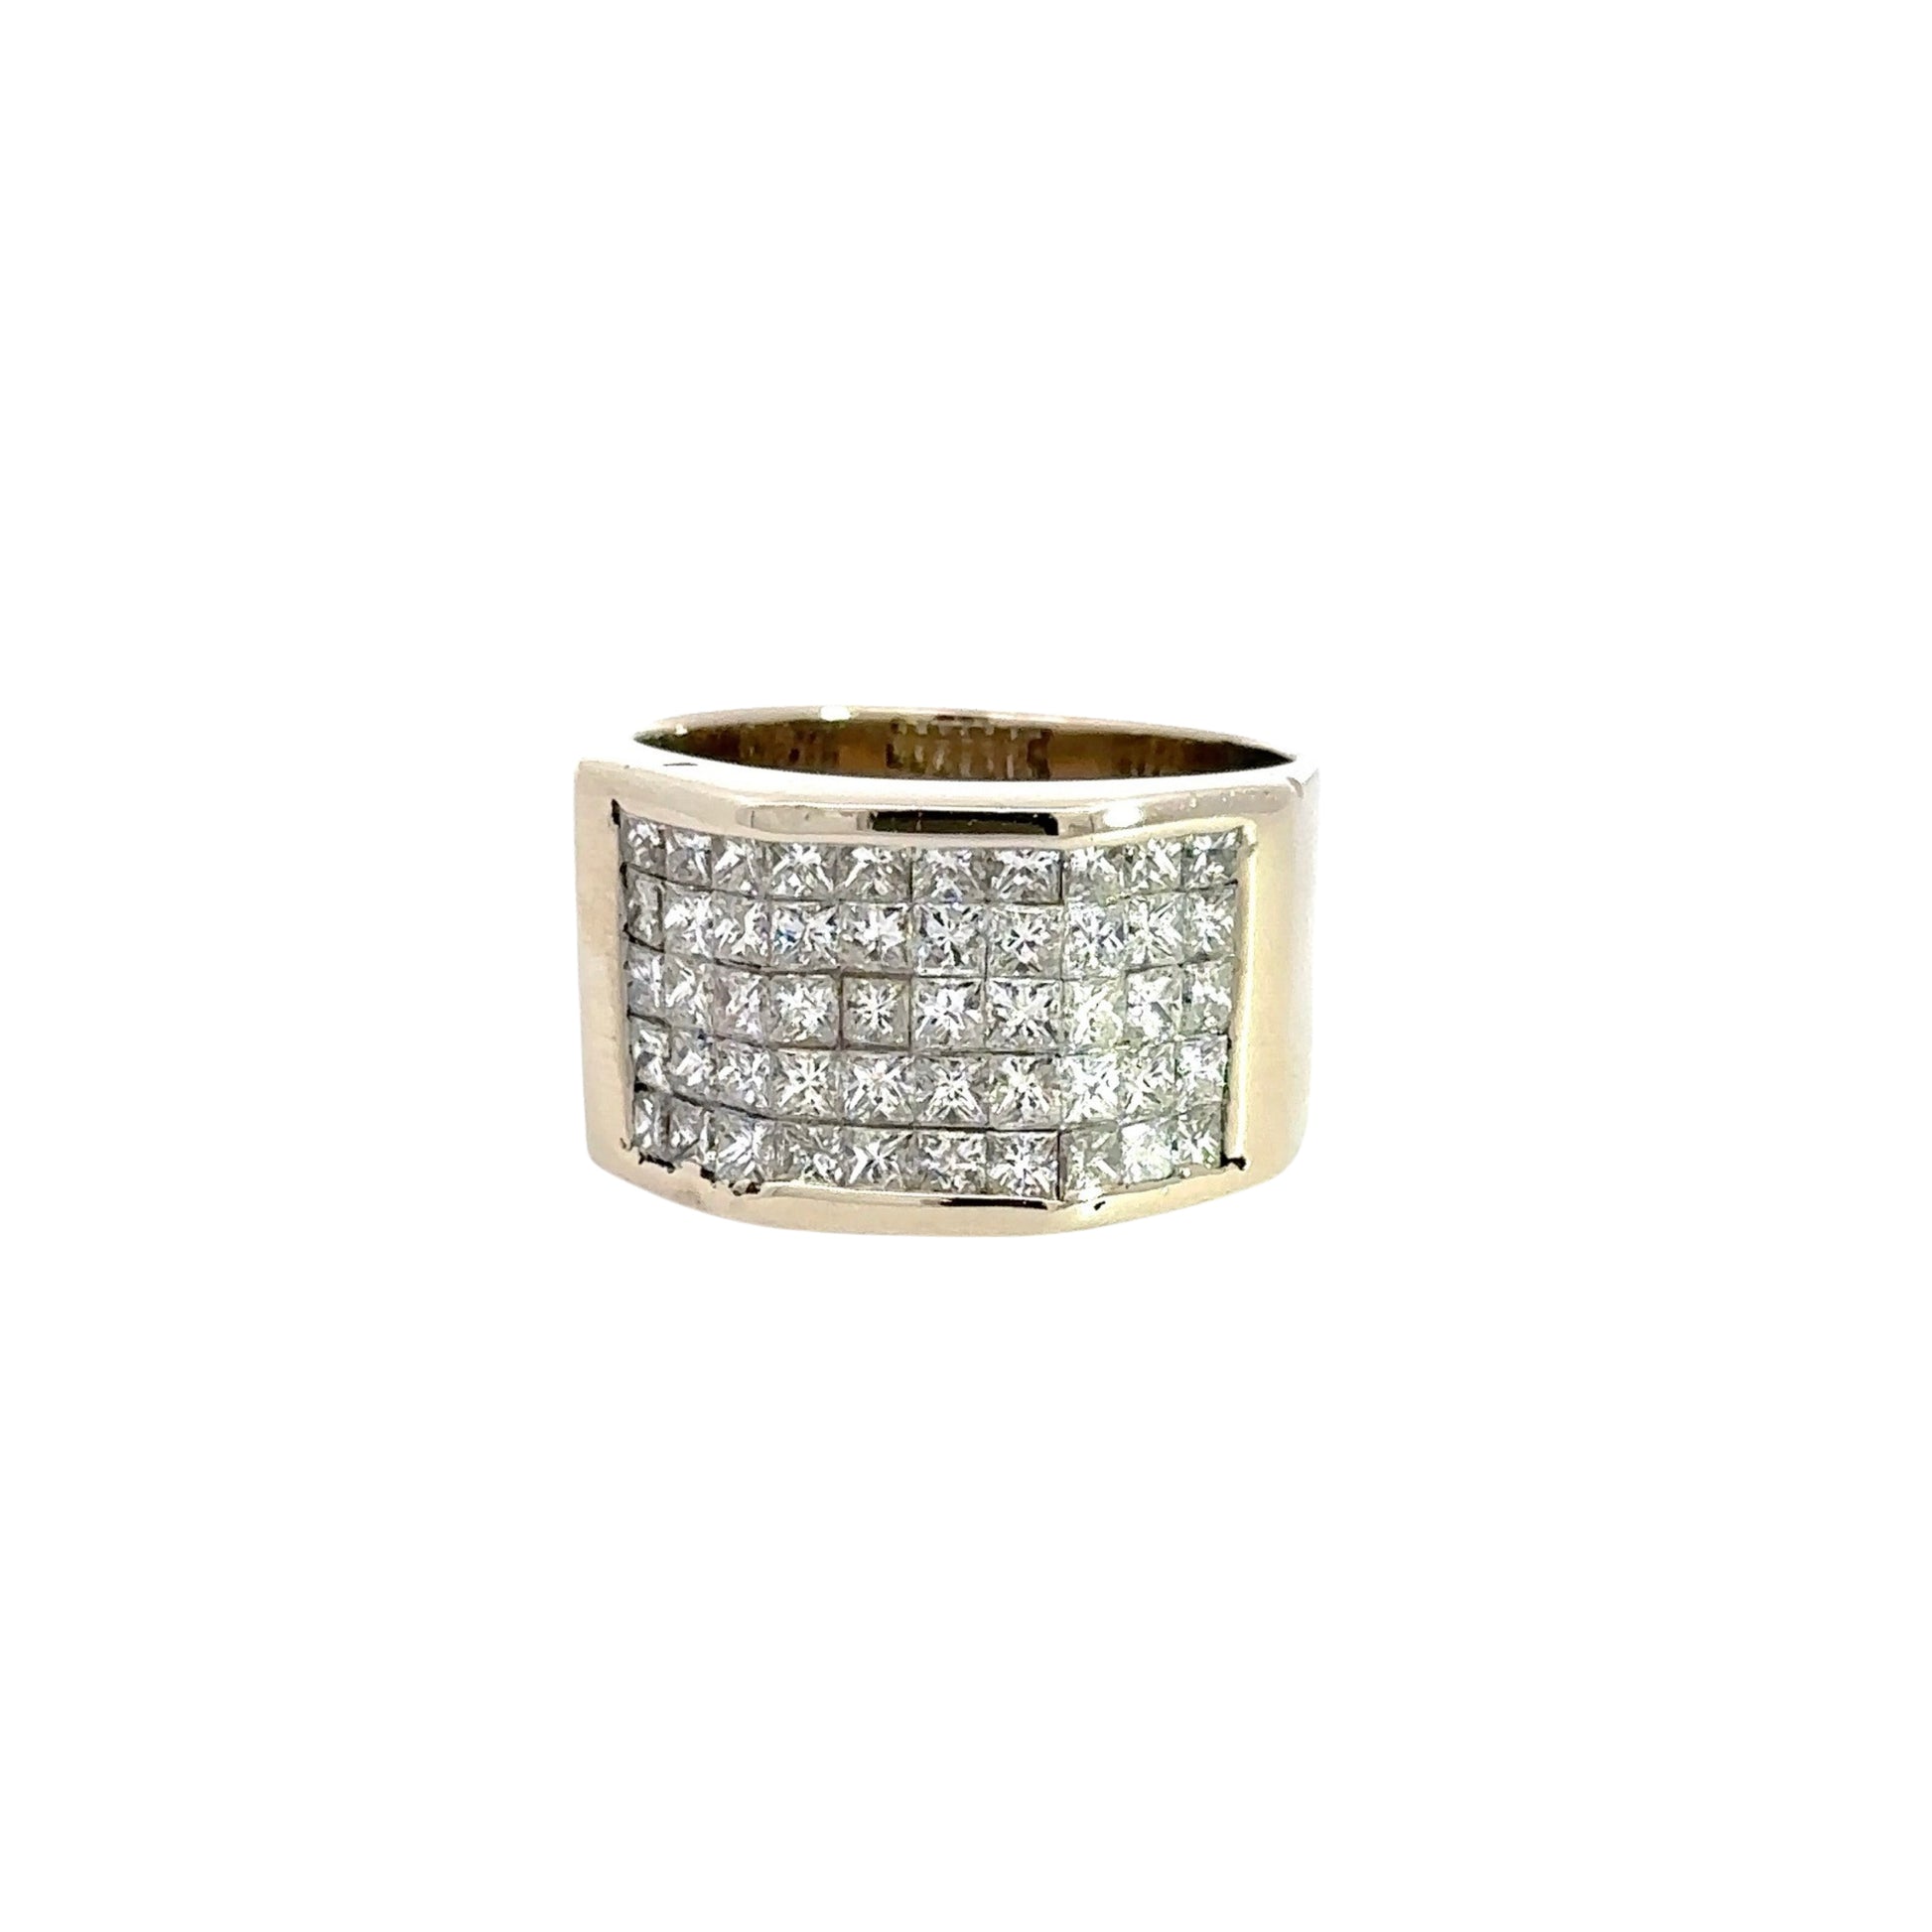 360 video of white gold band ring with 5 rows of princess-cut diamonds in the front.